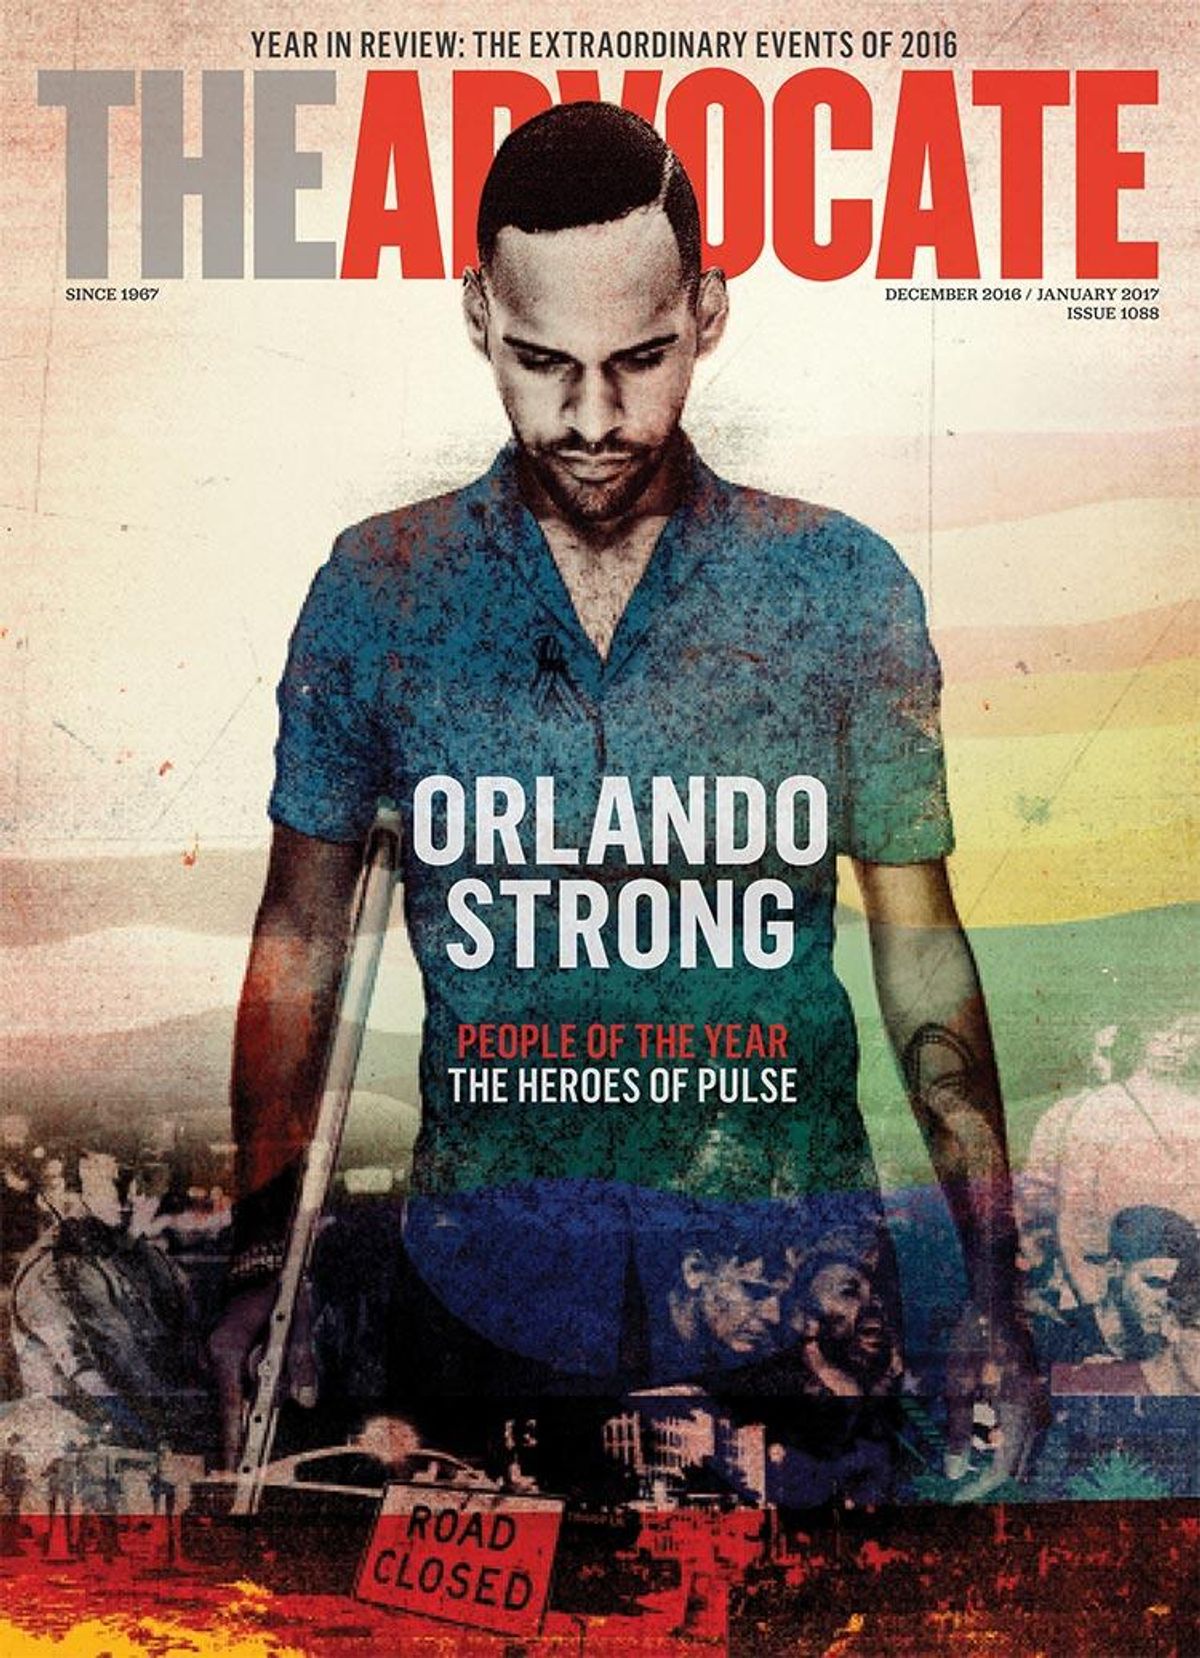 People of the Year: The Heroes of Pulse